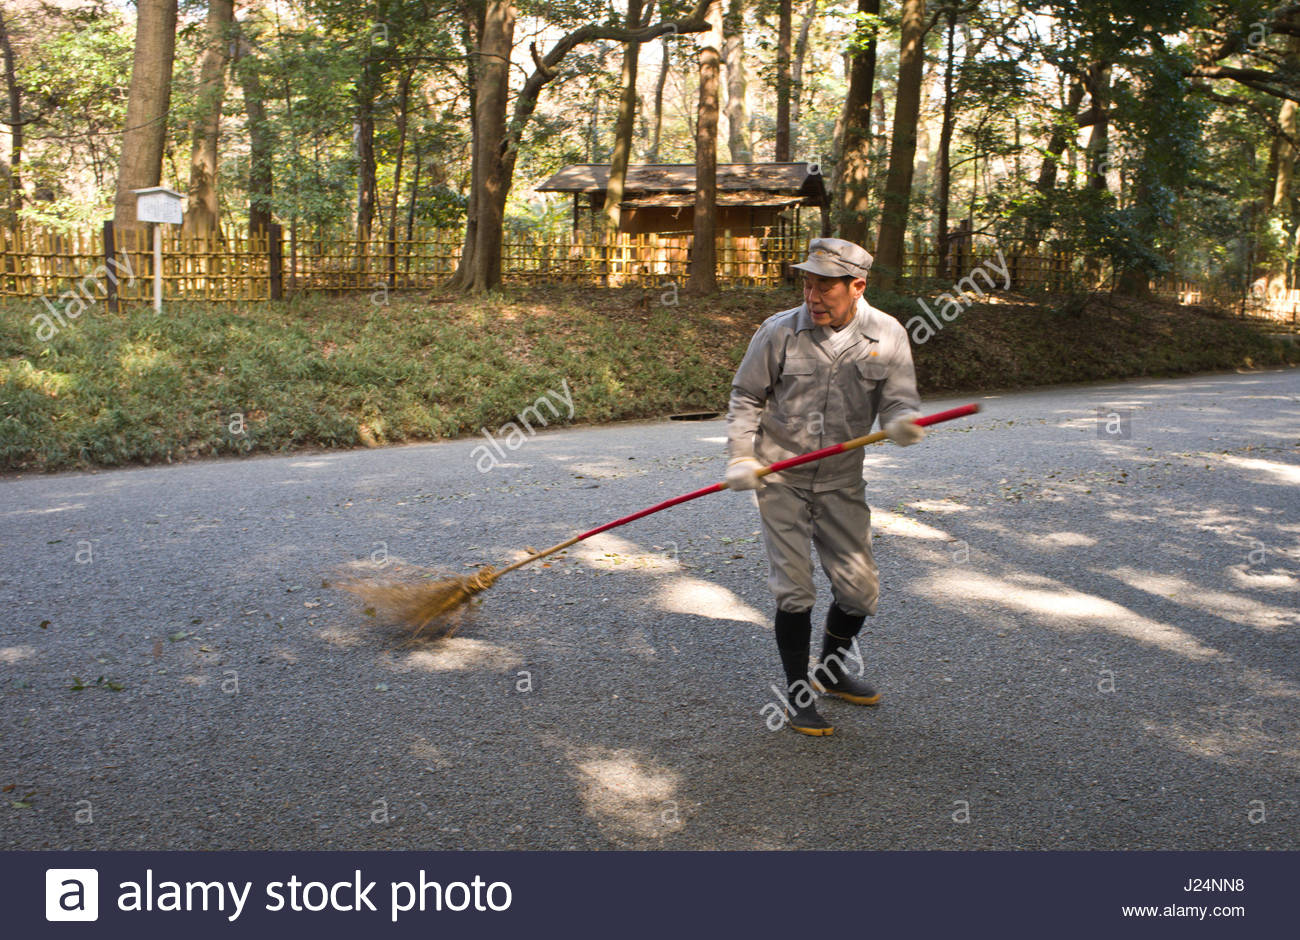 Japanese man using a long handled broom to sweep leaves off the ...